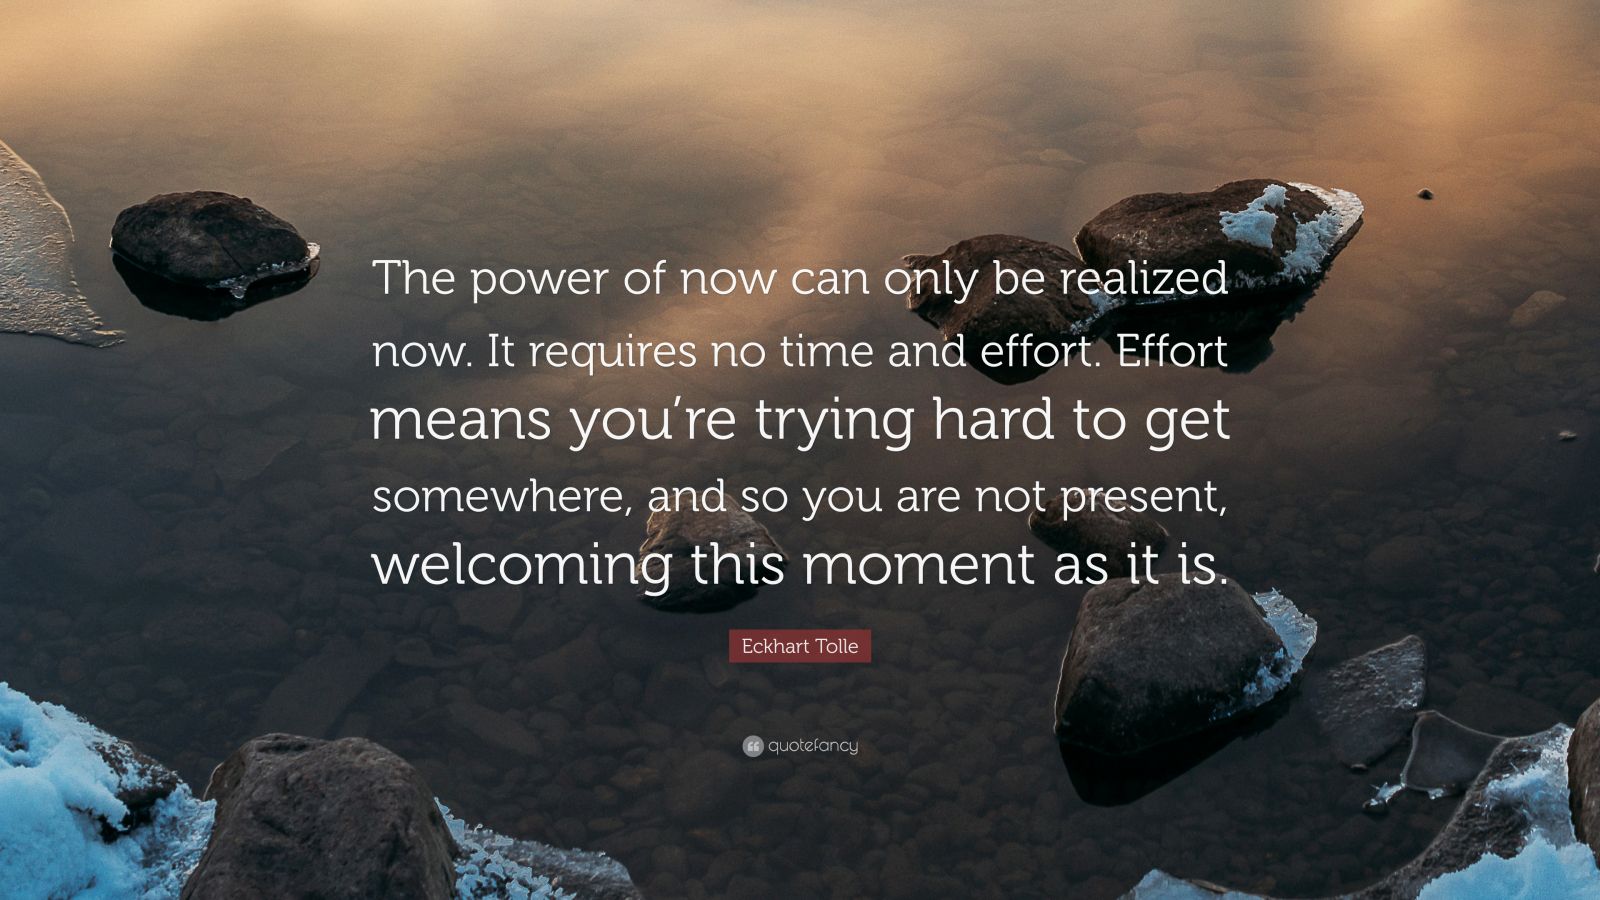 Eckhart Tolle Quote “The power of now can only be